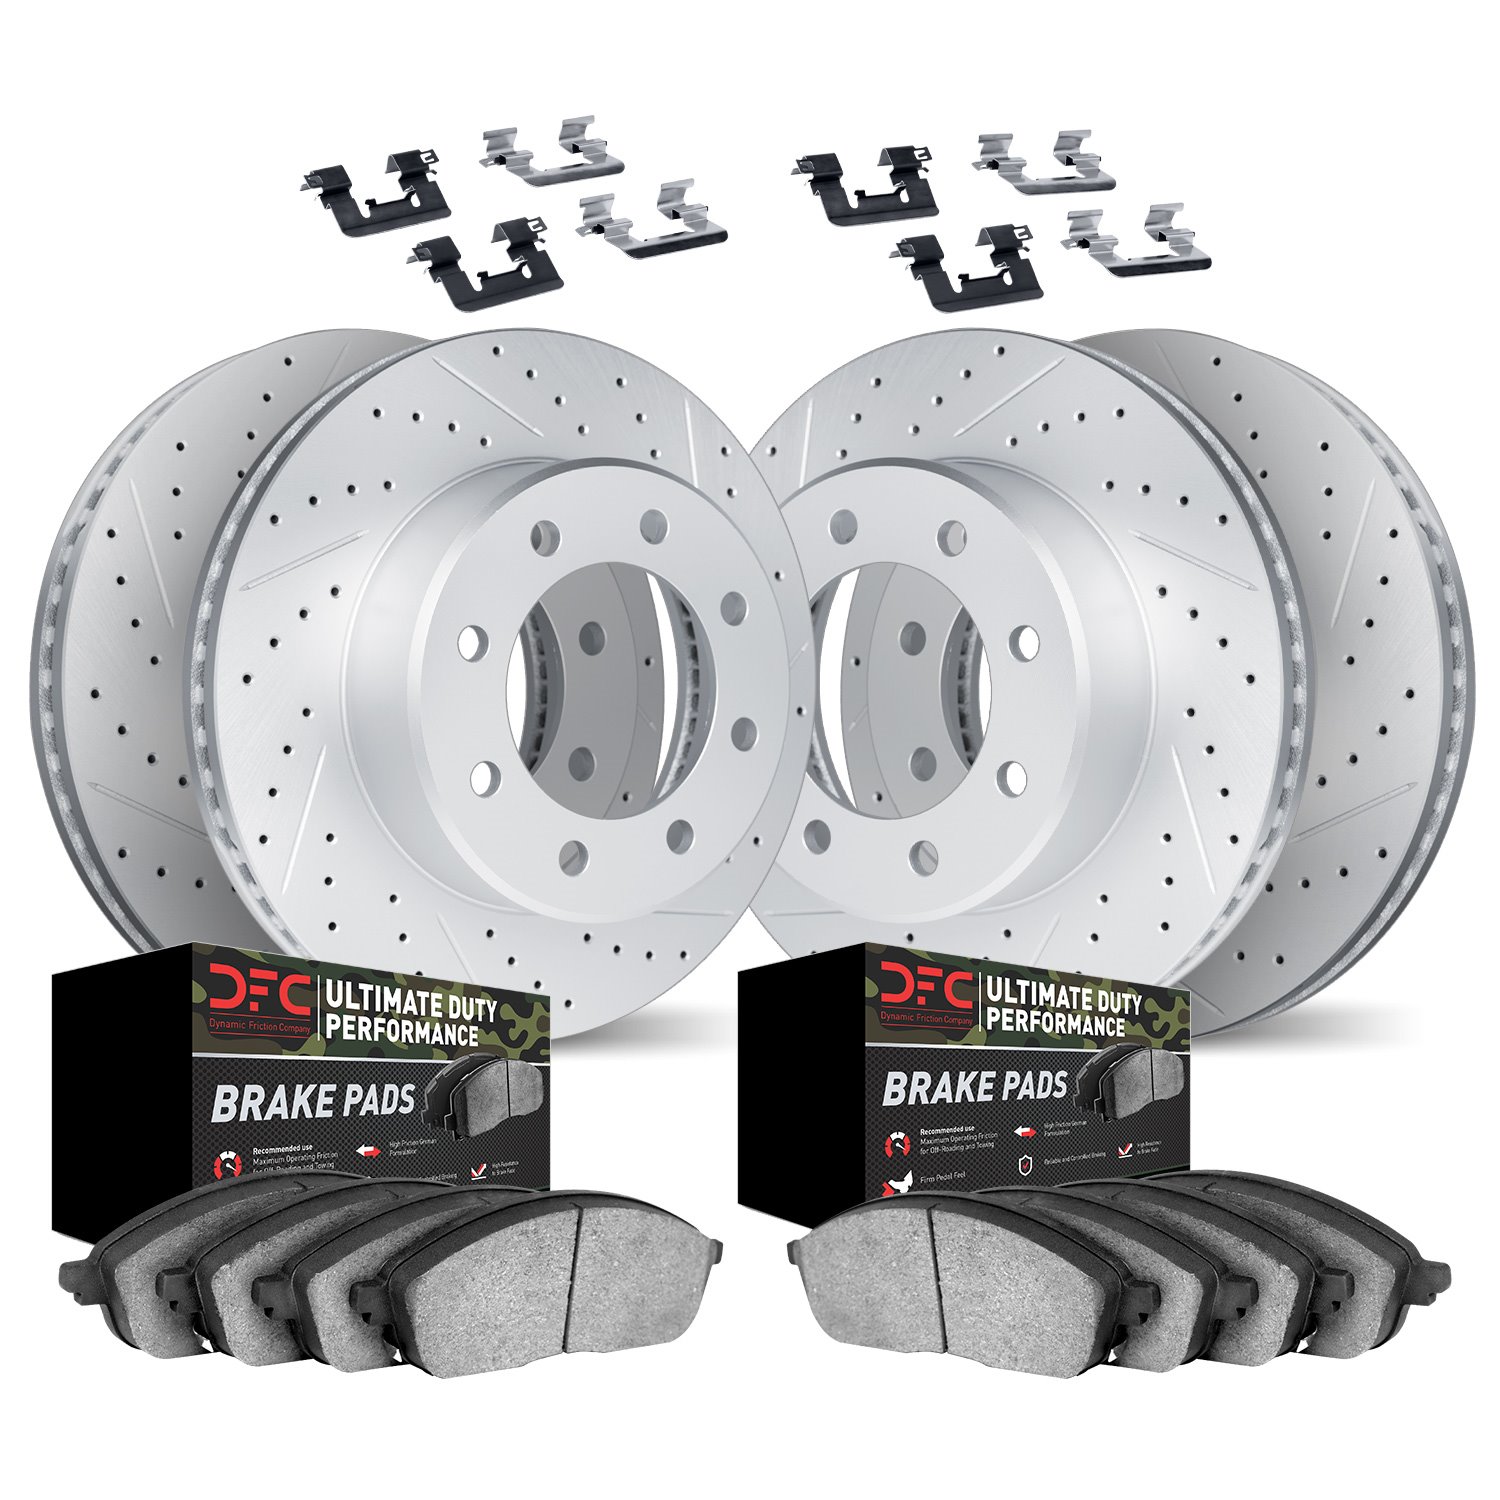 2414-54030 Geoperformance Drilled/Slotted Brake Rotors with Ultimate-Duty Brake Pads Kit & Hardware, 2010-2012 Ford/Lincoln/Merc